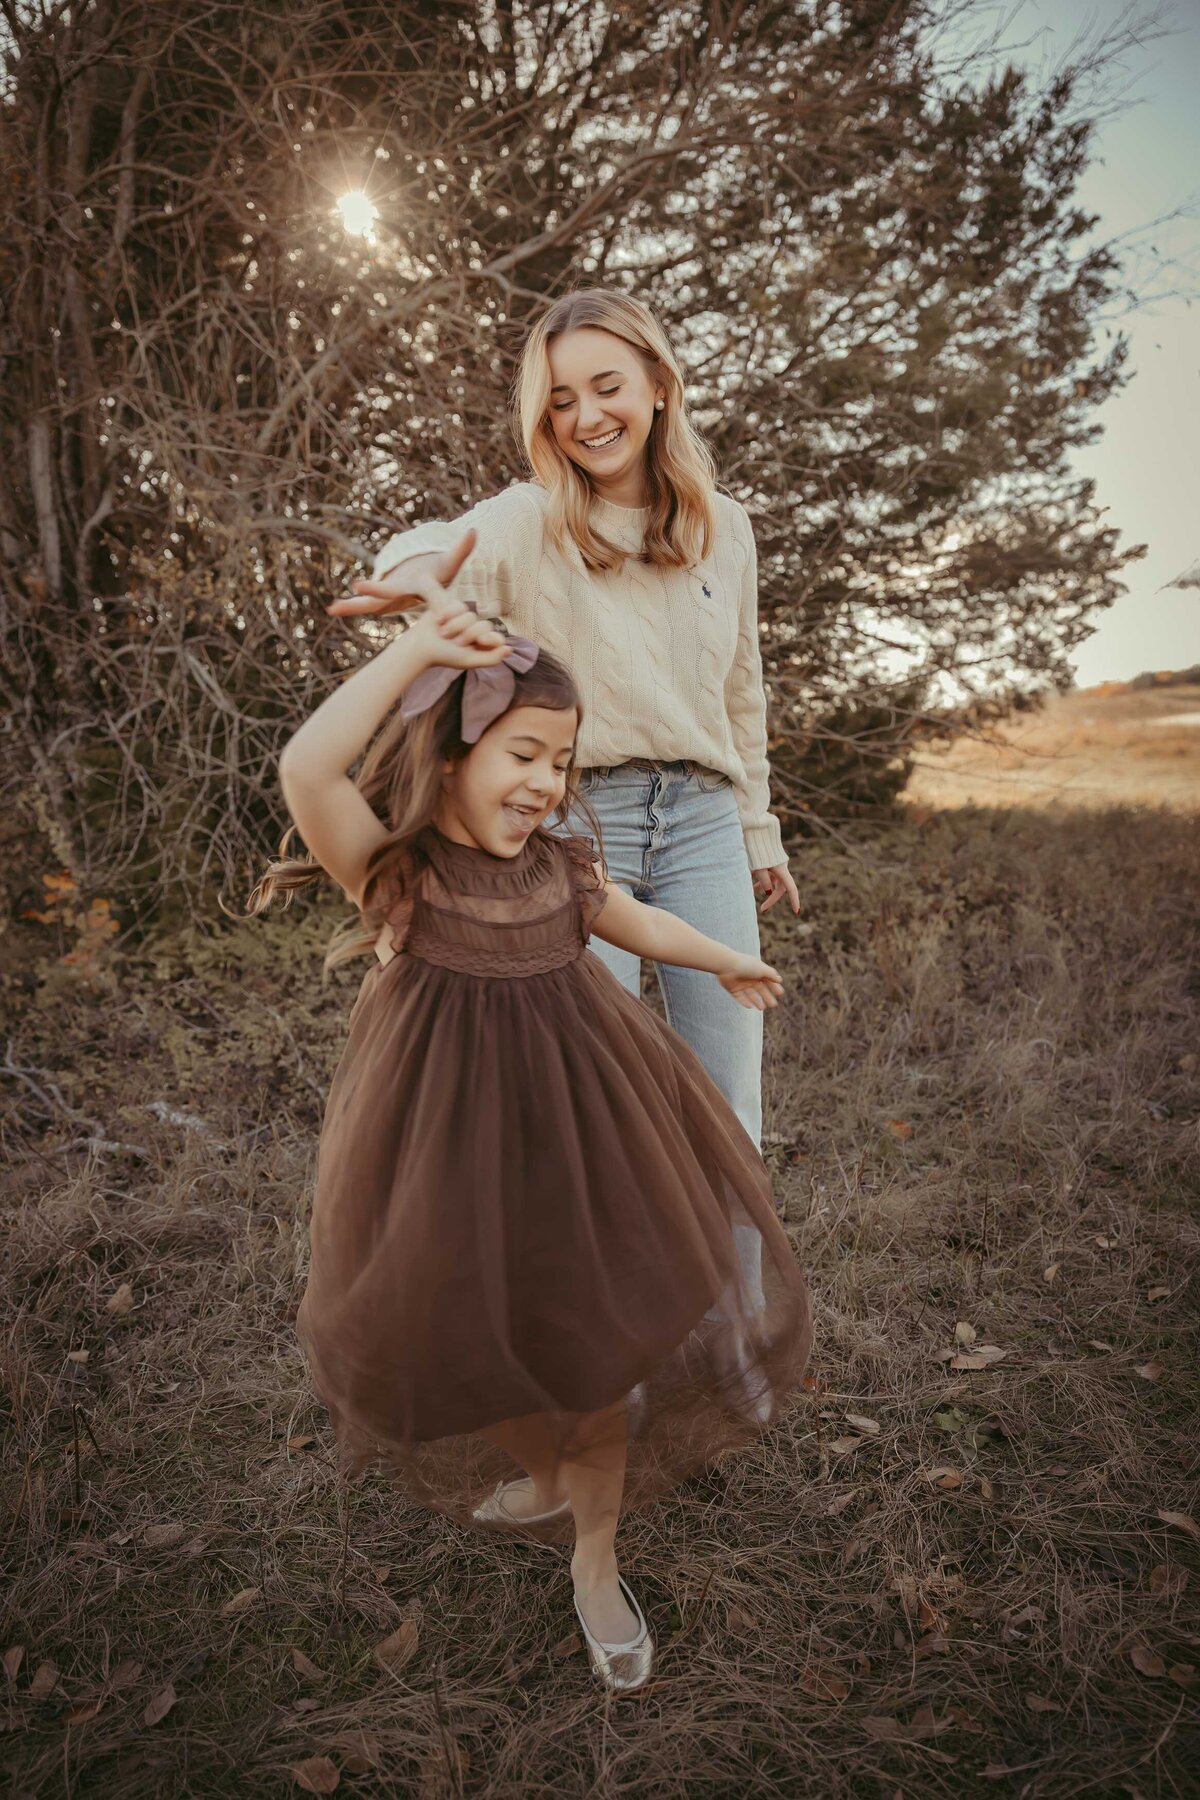 teenage daughter holding her younger sister's hand and twirling her around.